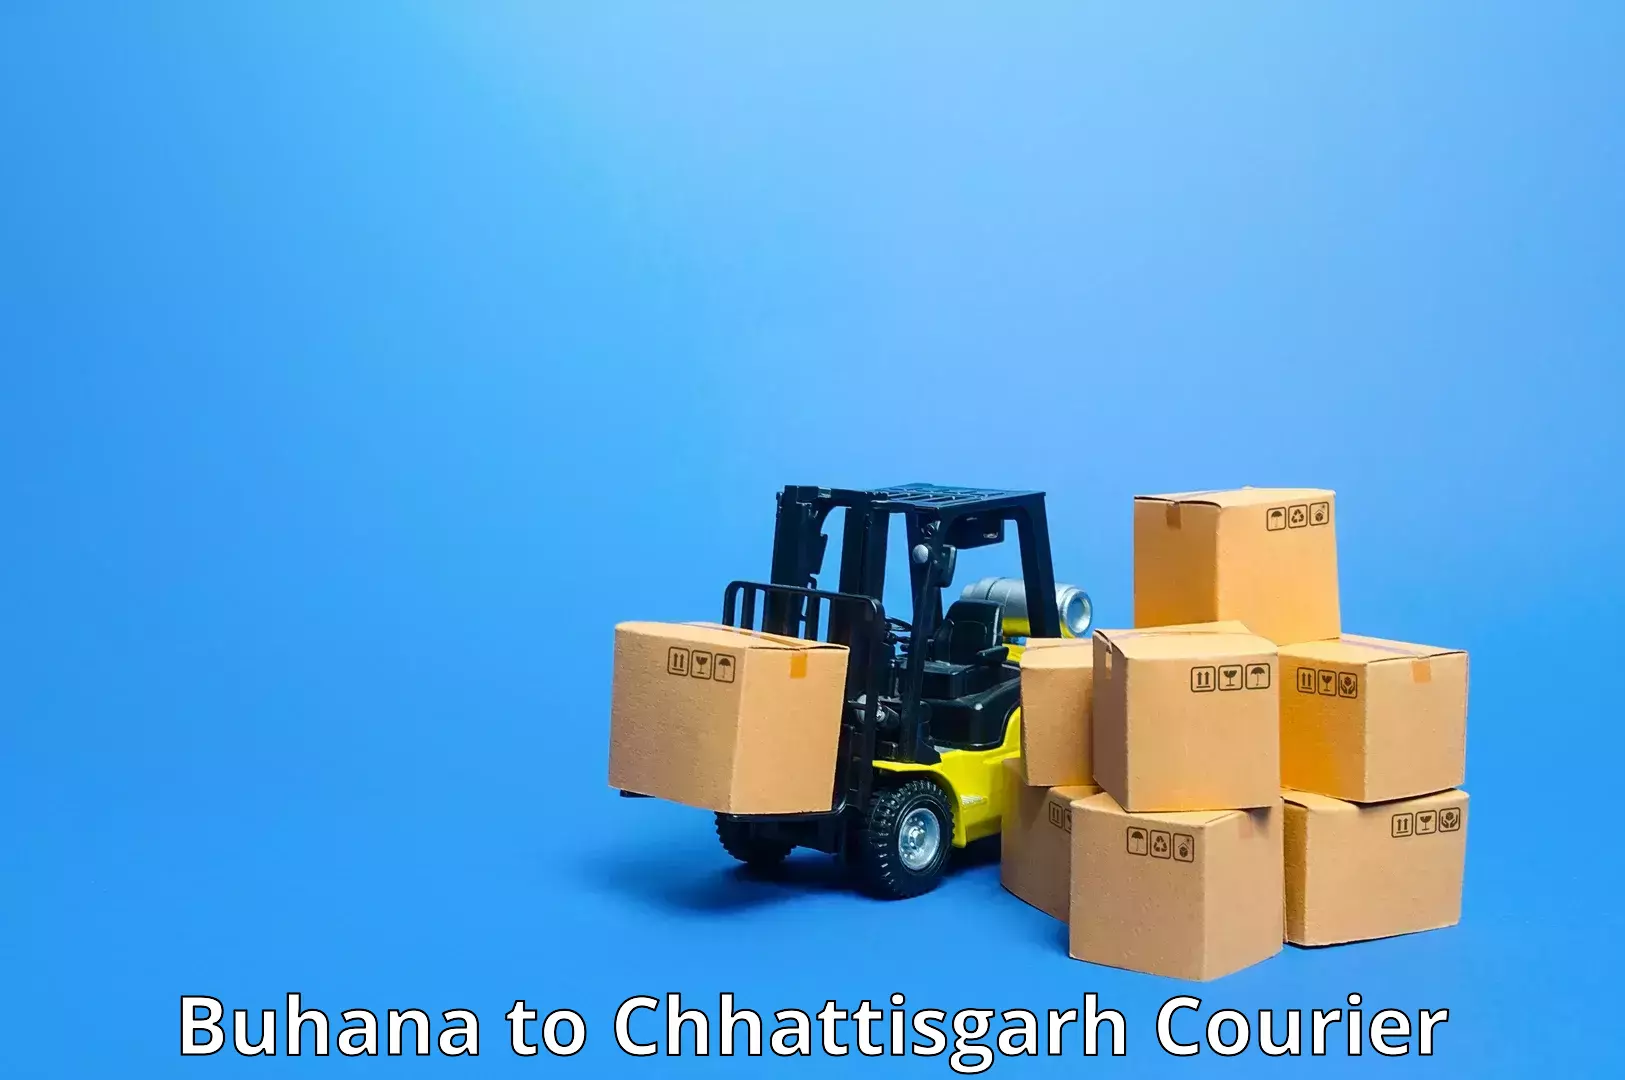 State-of-the-art courier technology Buhana to Pithora